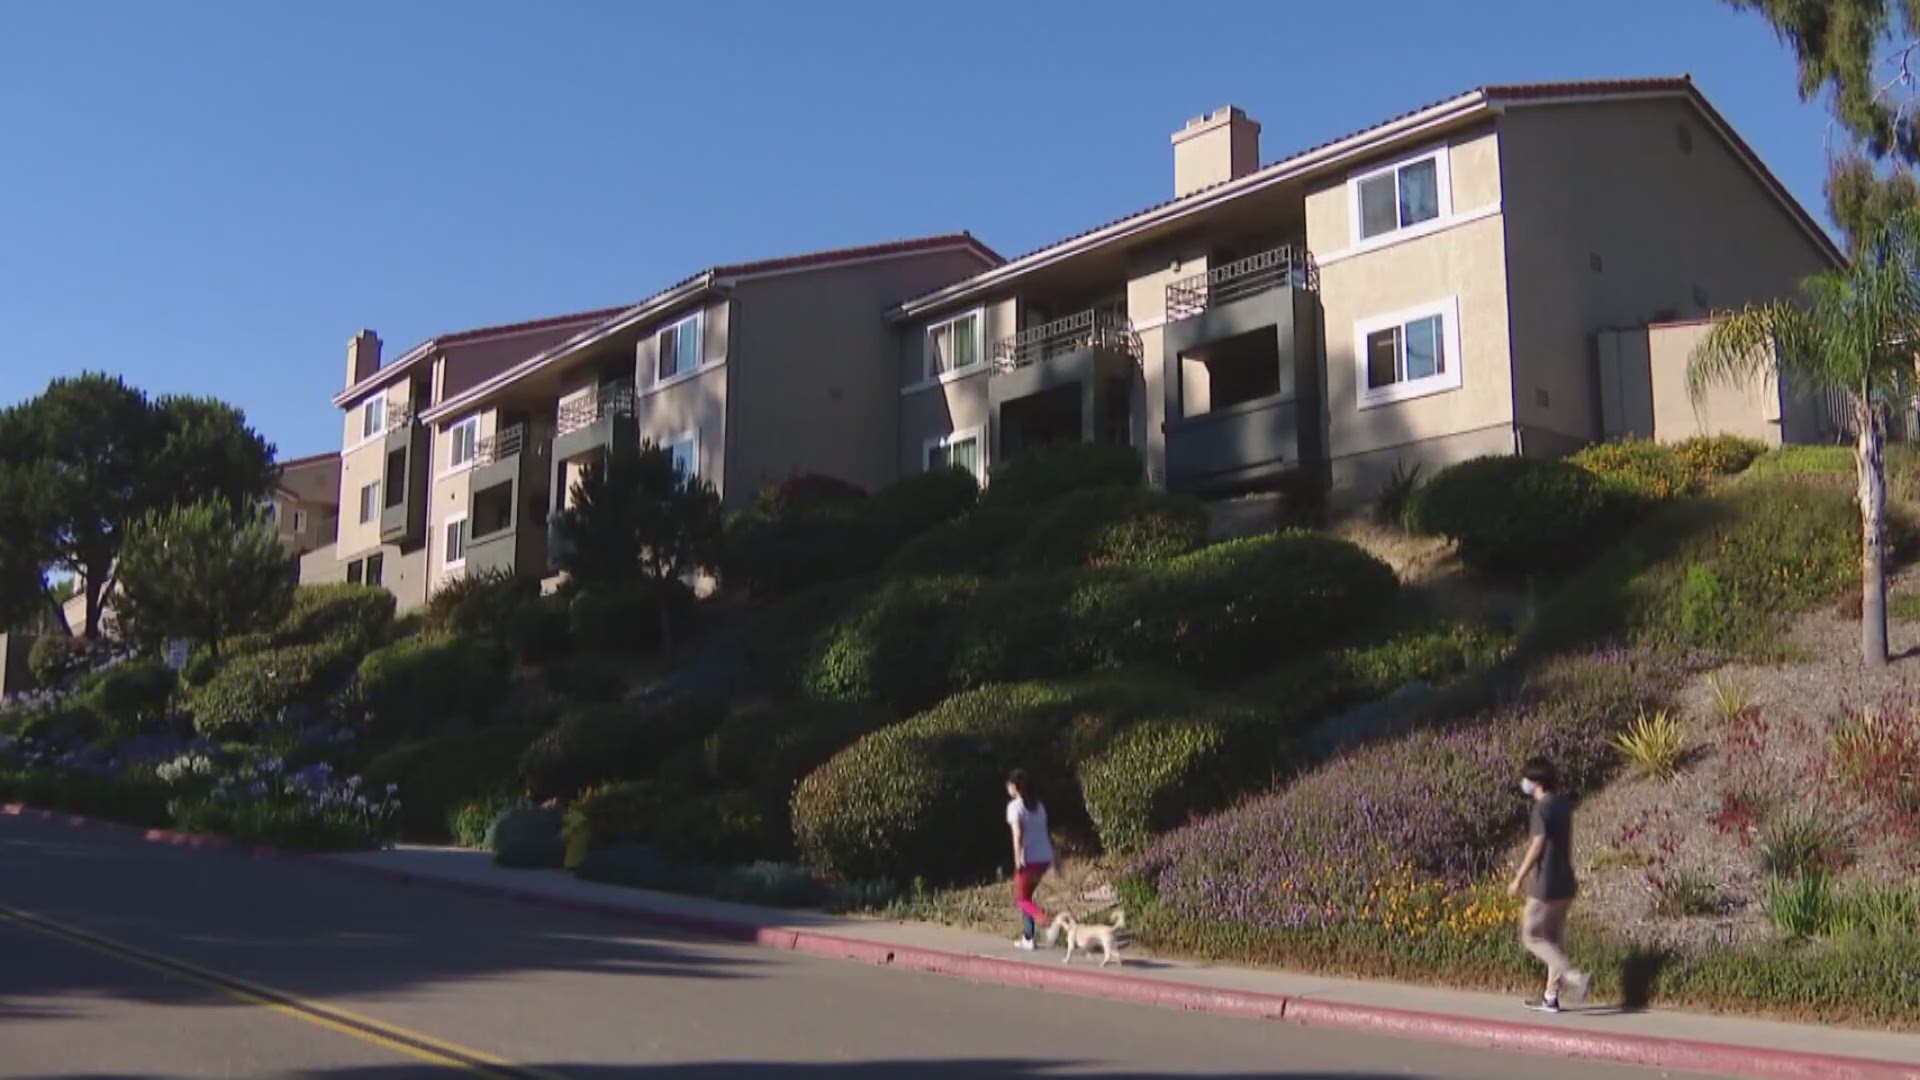 With many people still out of work and the eviction moratorium in place, tenants in San Diego are still able to keep a roof over their heads during the pandemic.